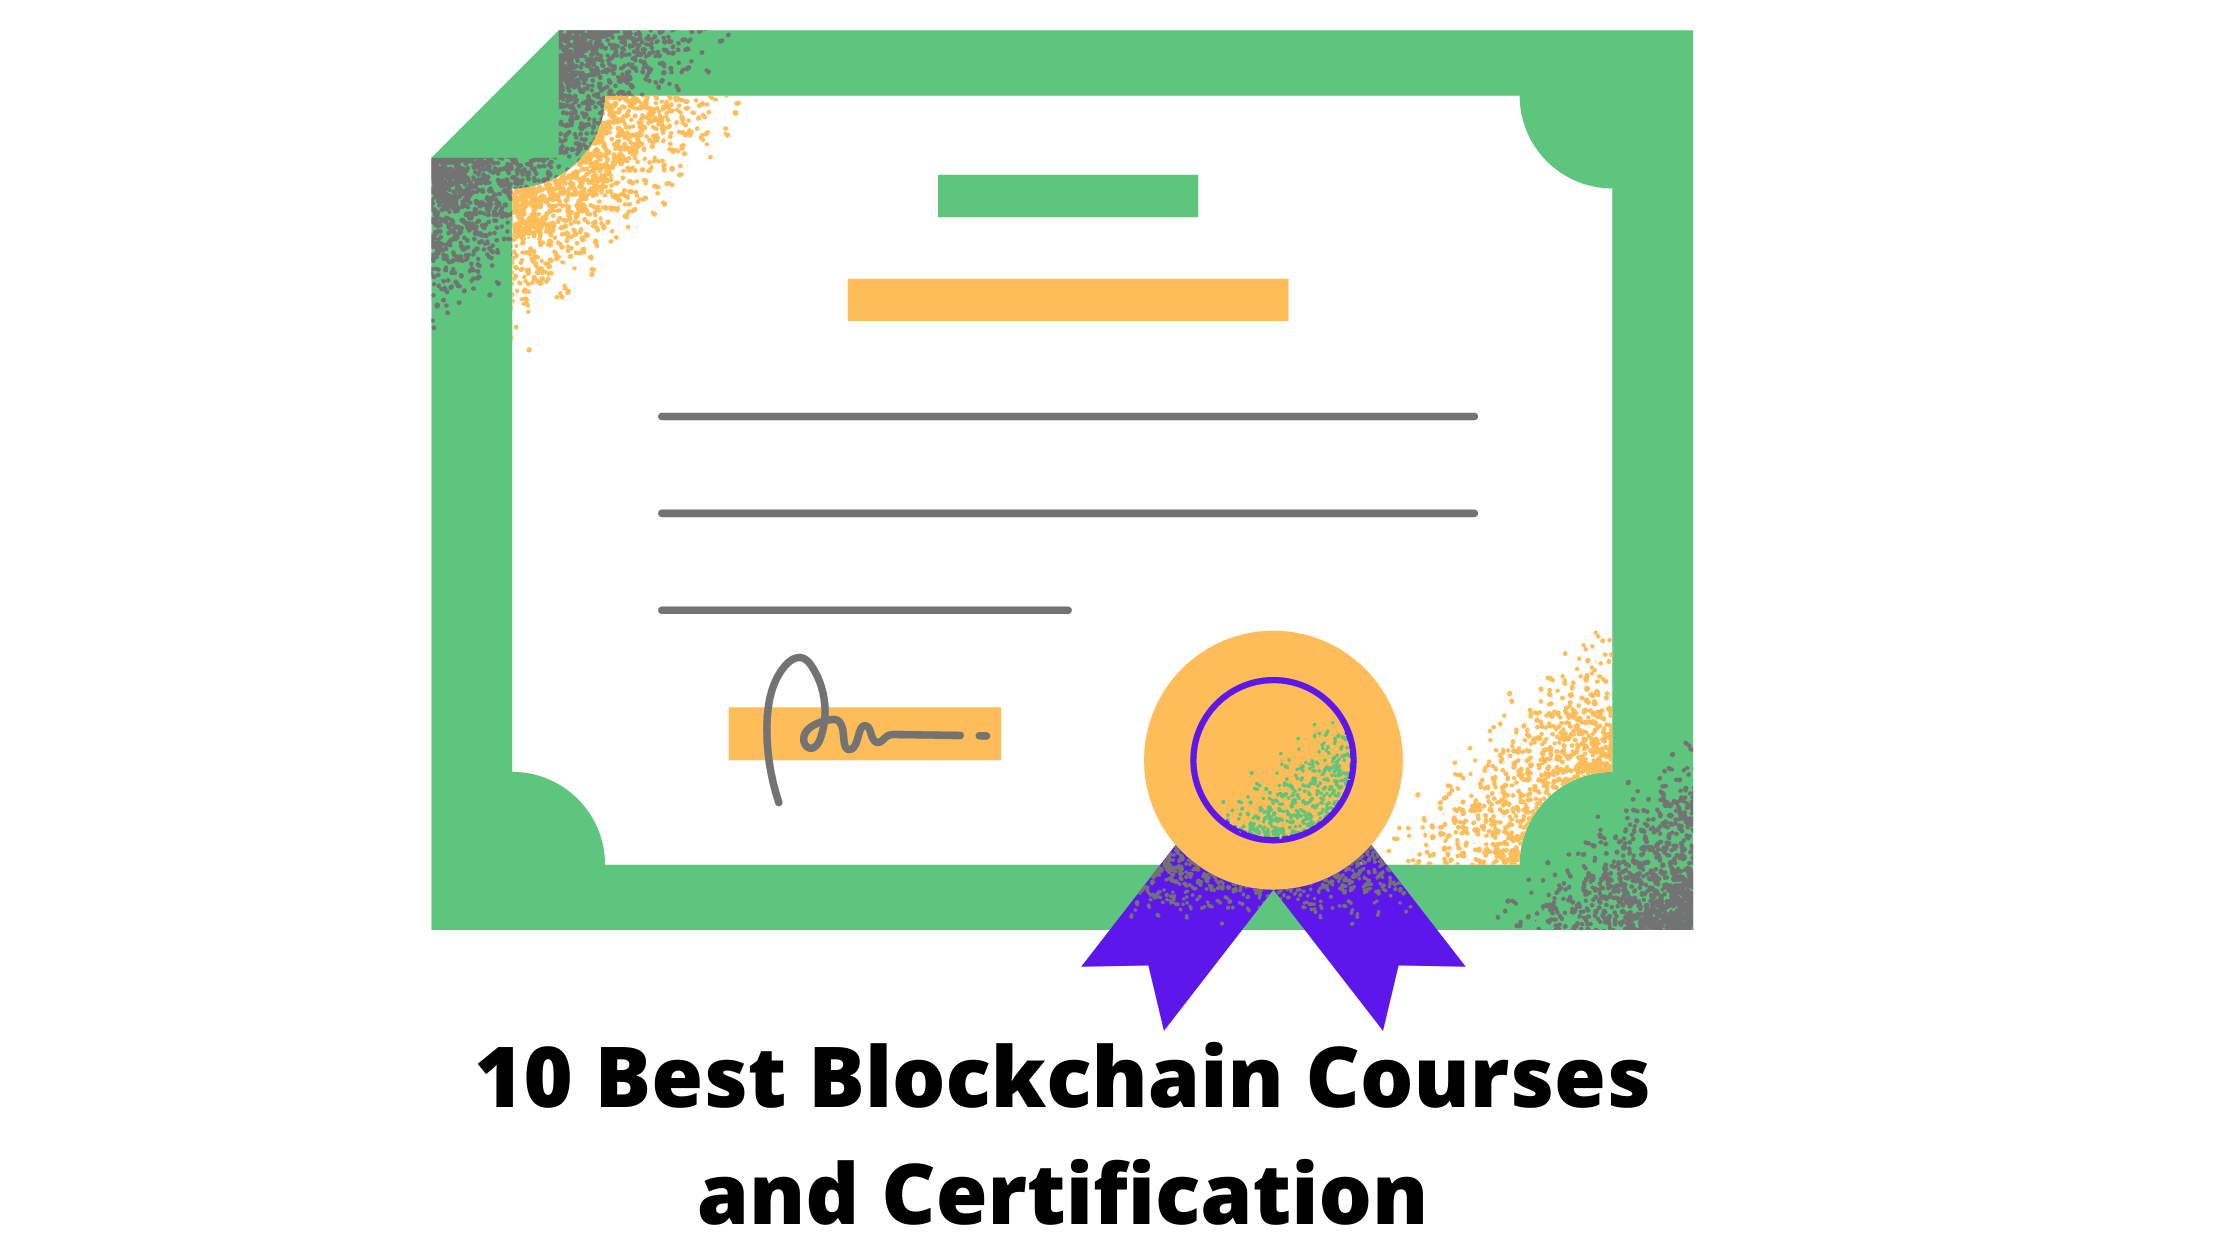 10 Best Blockchain Courses and Certification